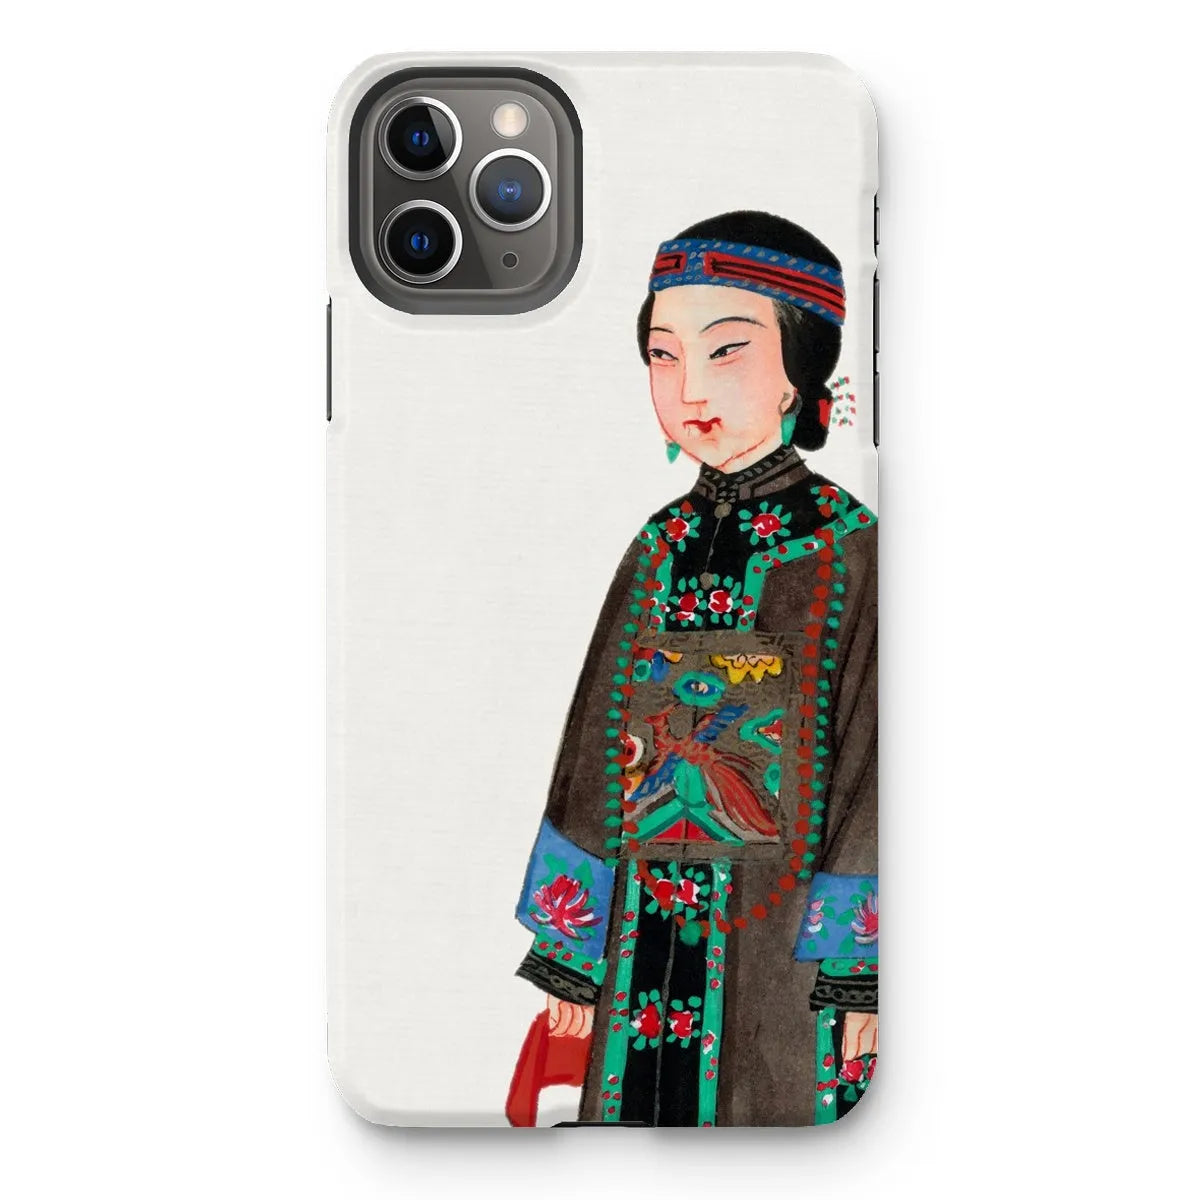 Noblewoman At Court - Chinese Aesthetic Art Phone Case - Iphone 11 Pro Max / Matte - Mobile Phone Cases - Aesthetic Art